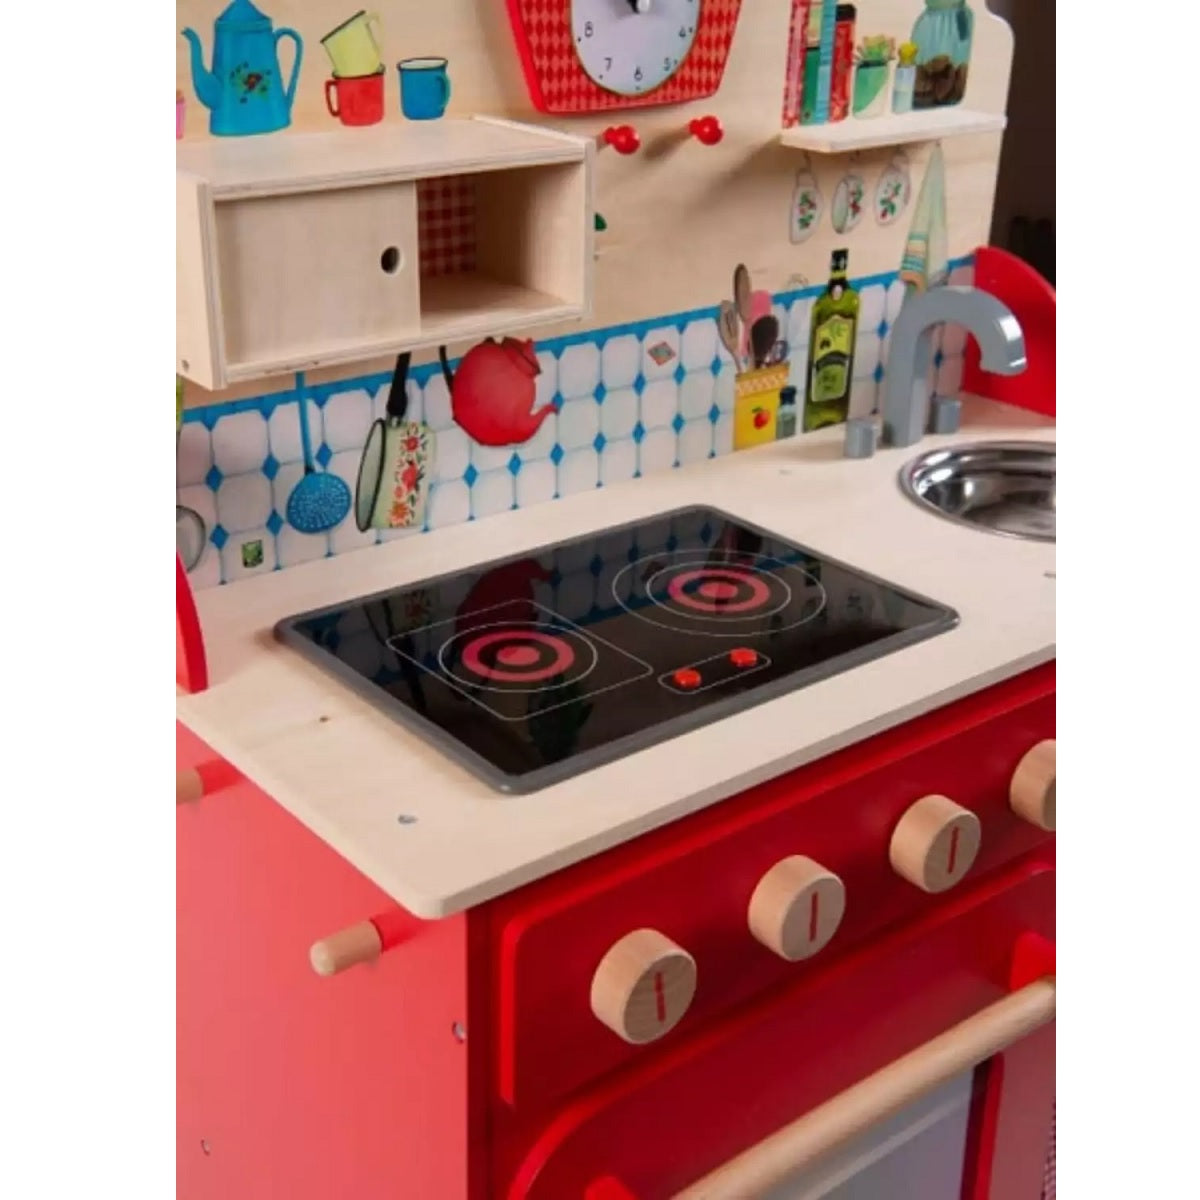 Grande Famille - Play Kitchen by Moulin Roty